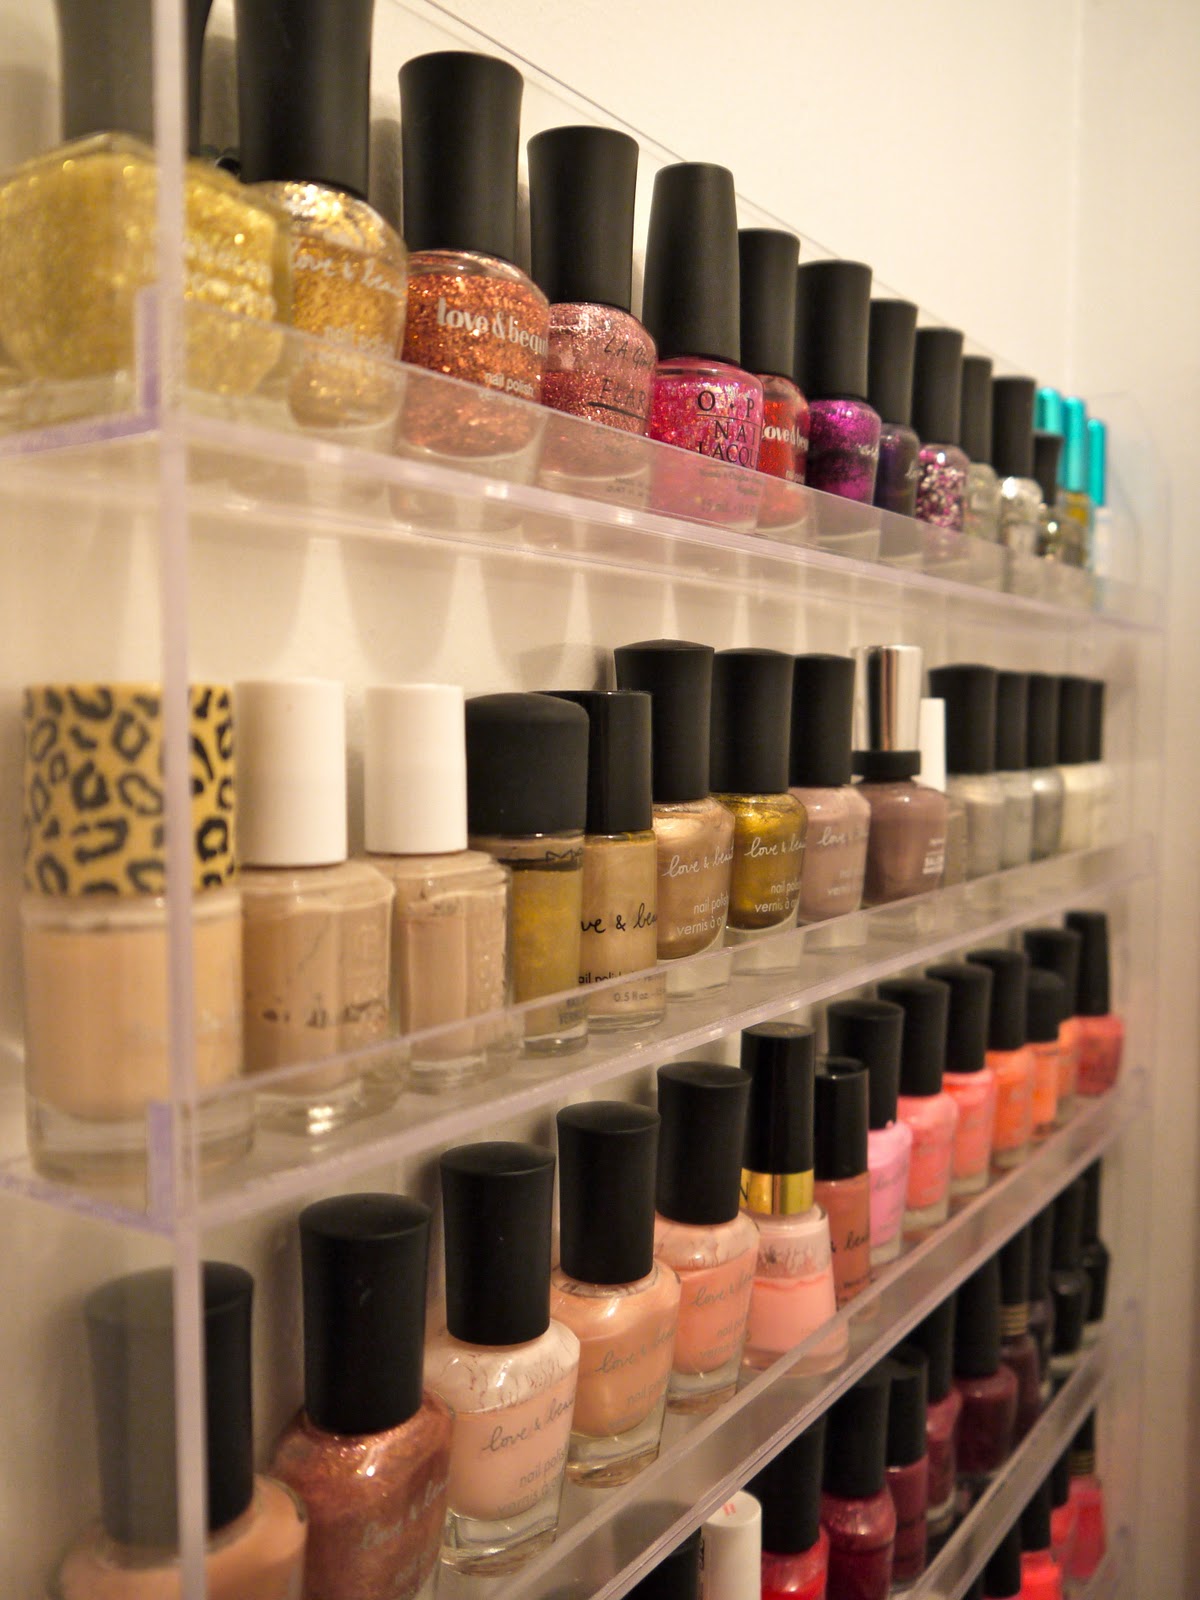 I have been searching for a great way to store and display my nail polish